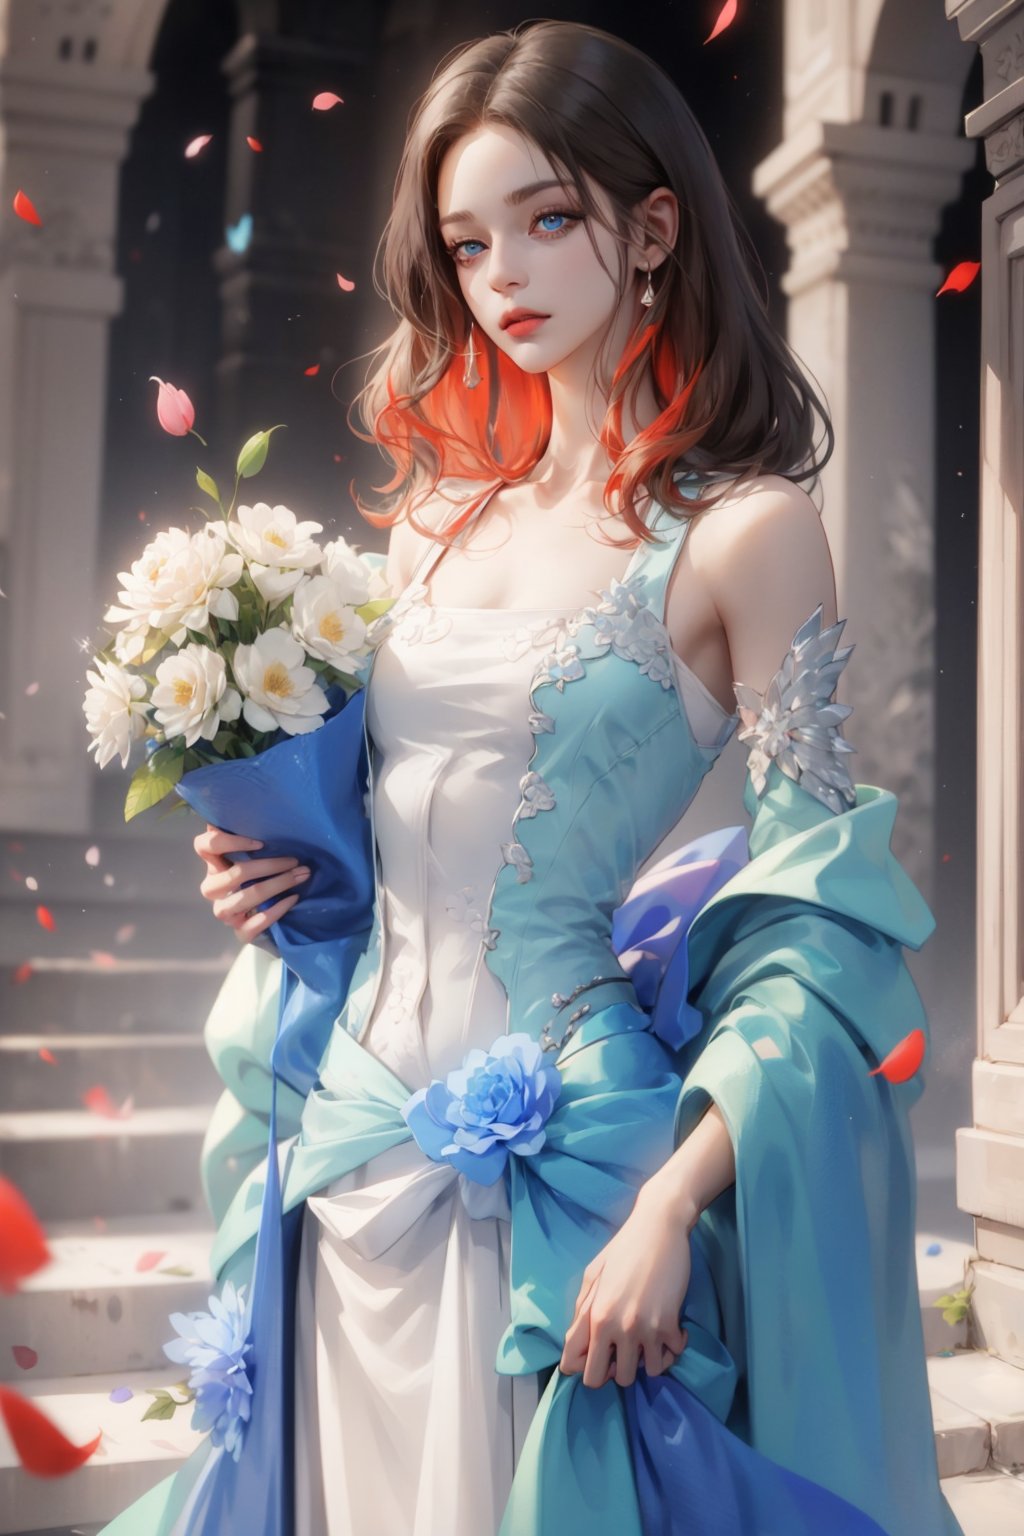 (asterpiece:1.2, best quality), (Soft light), (shiny skin), 1people,  ginger_hair, hateful look, ball party, kingdom, ballgown, eye_lashes, collarbone, victorian, blue eyes, red_long_ hair_girl, black_short_hair_man, standing, holding campaigne, flowers petals,weiboZH,hll